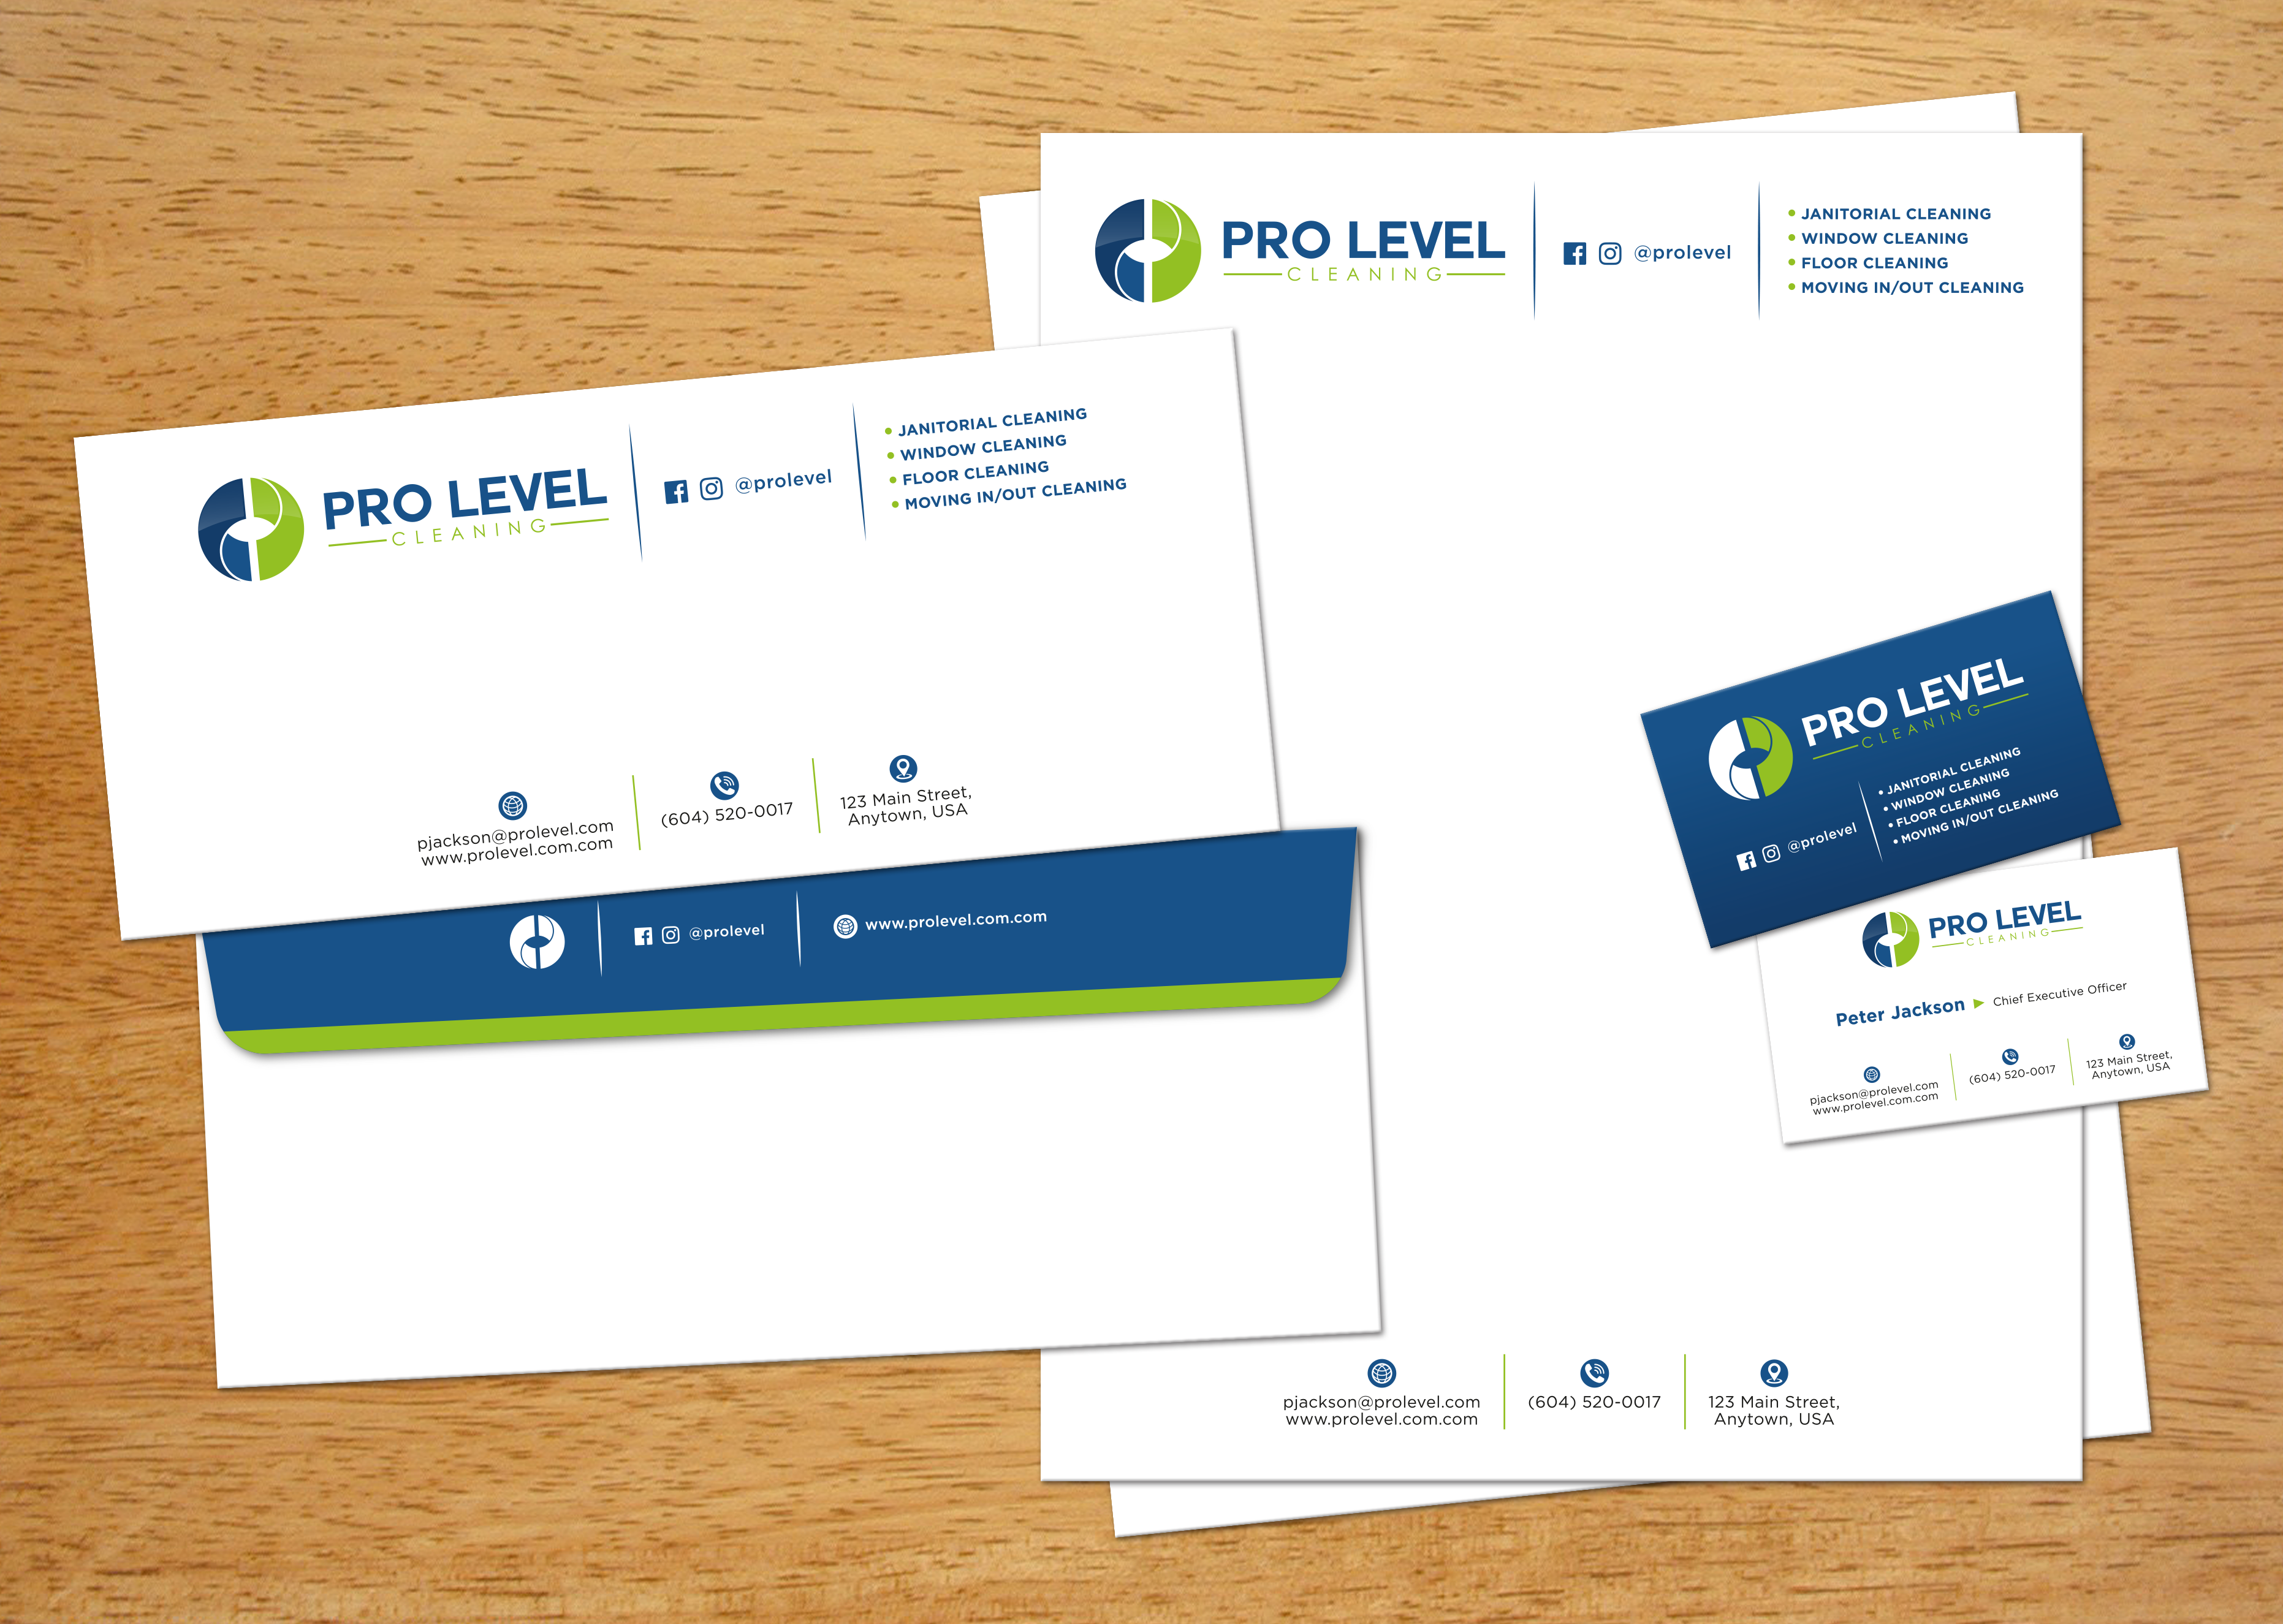 Pro Level stationery fmr-2.png